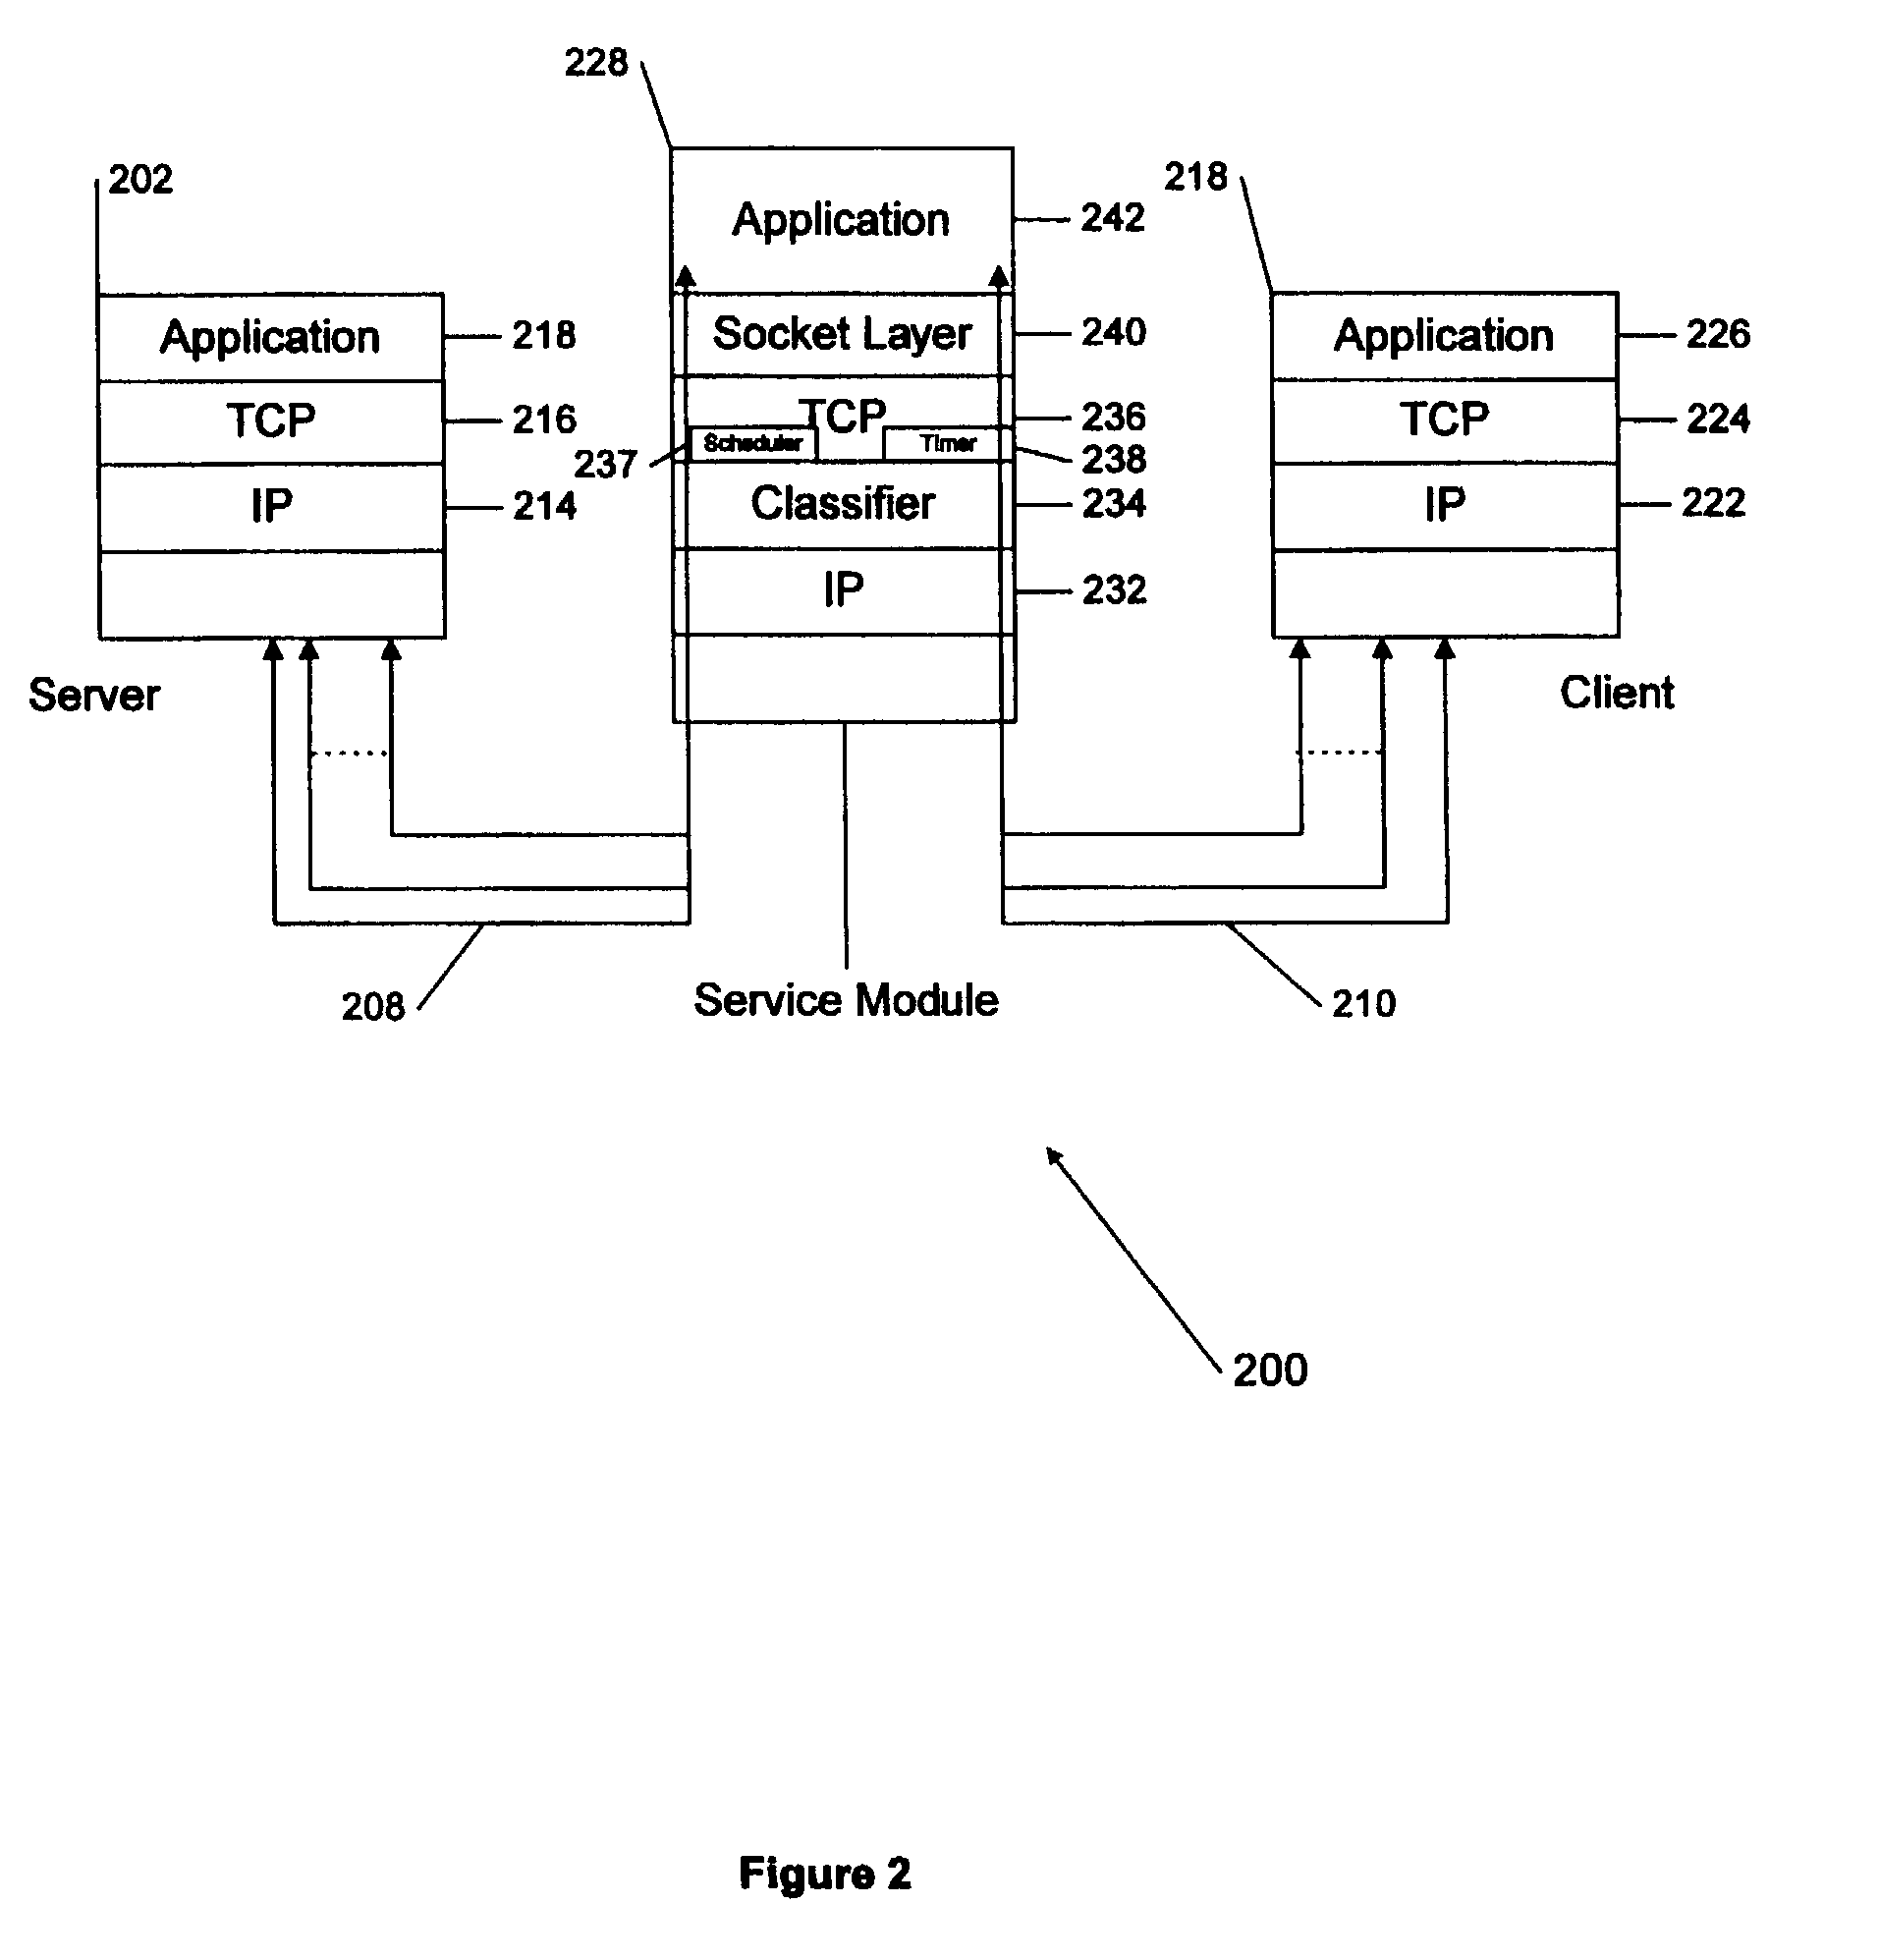 Quality of service management for multiple connections within a network communication system